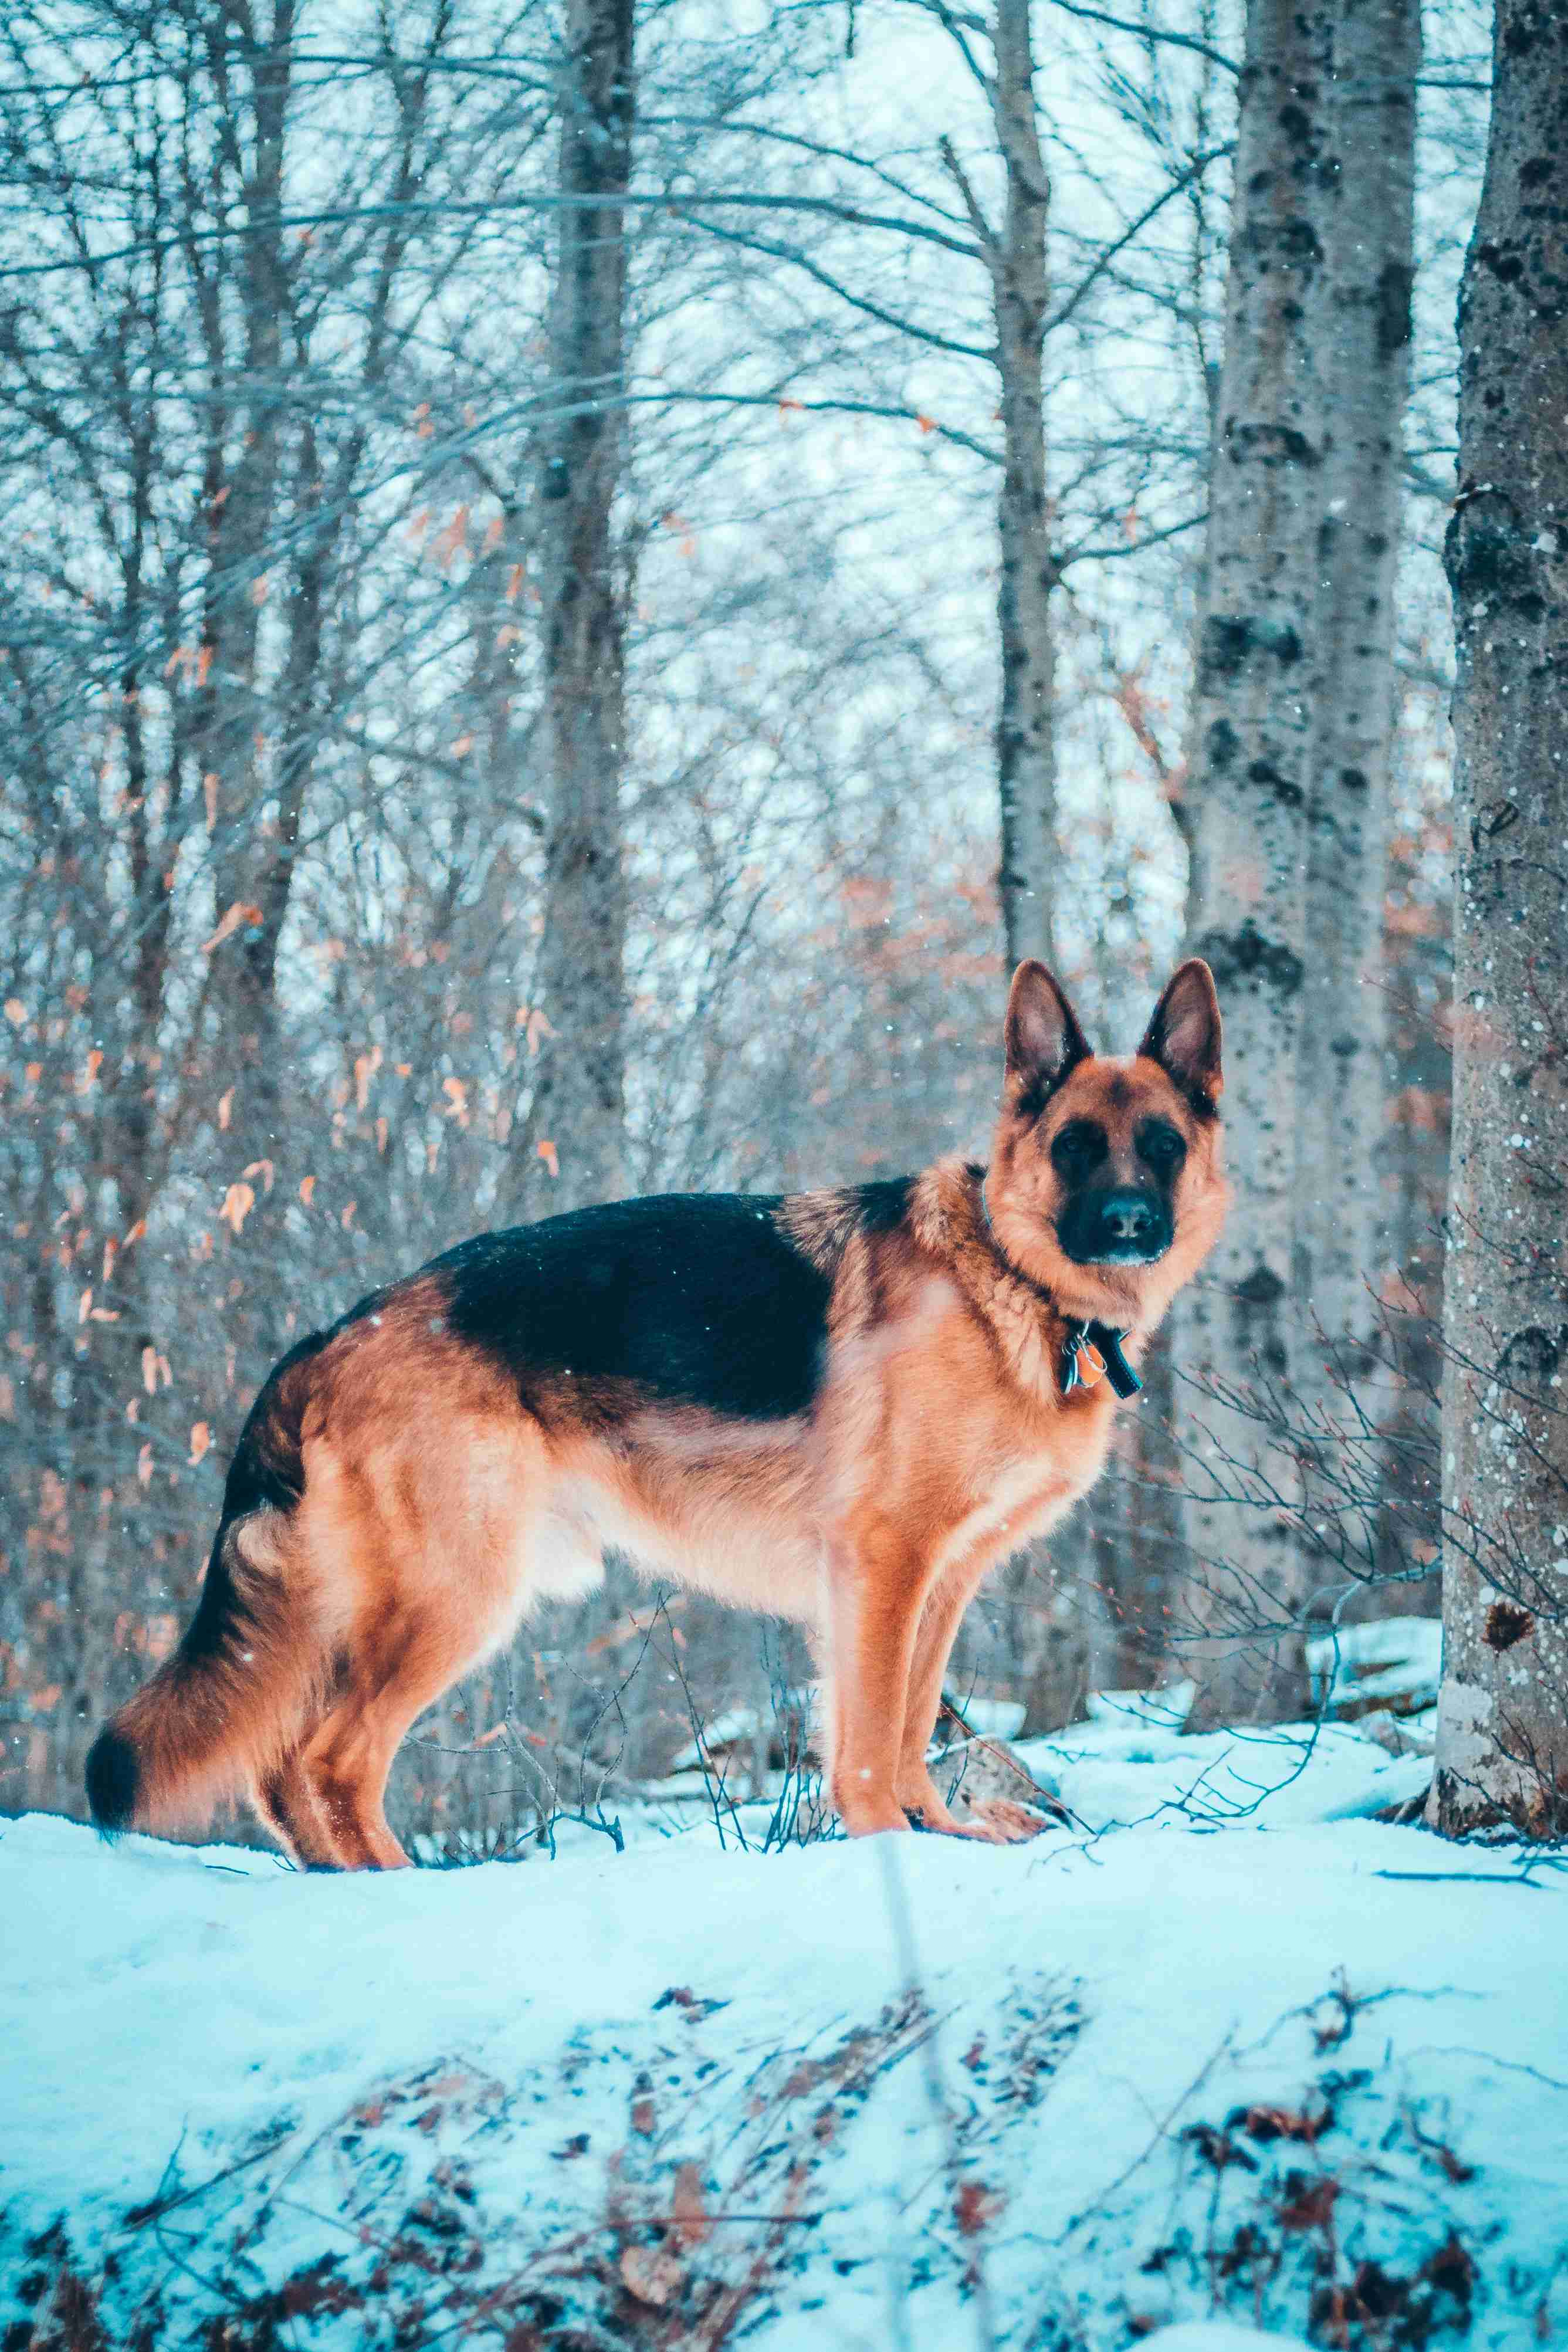 Can German shepherds be trained to become police or military dogs?